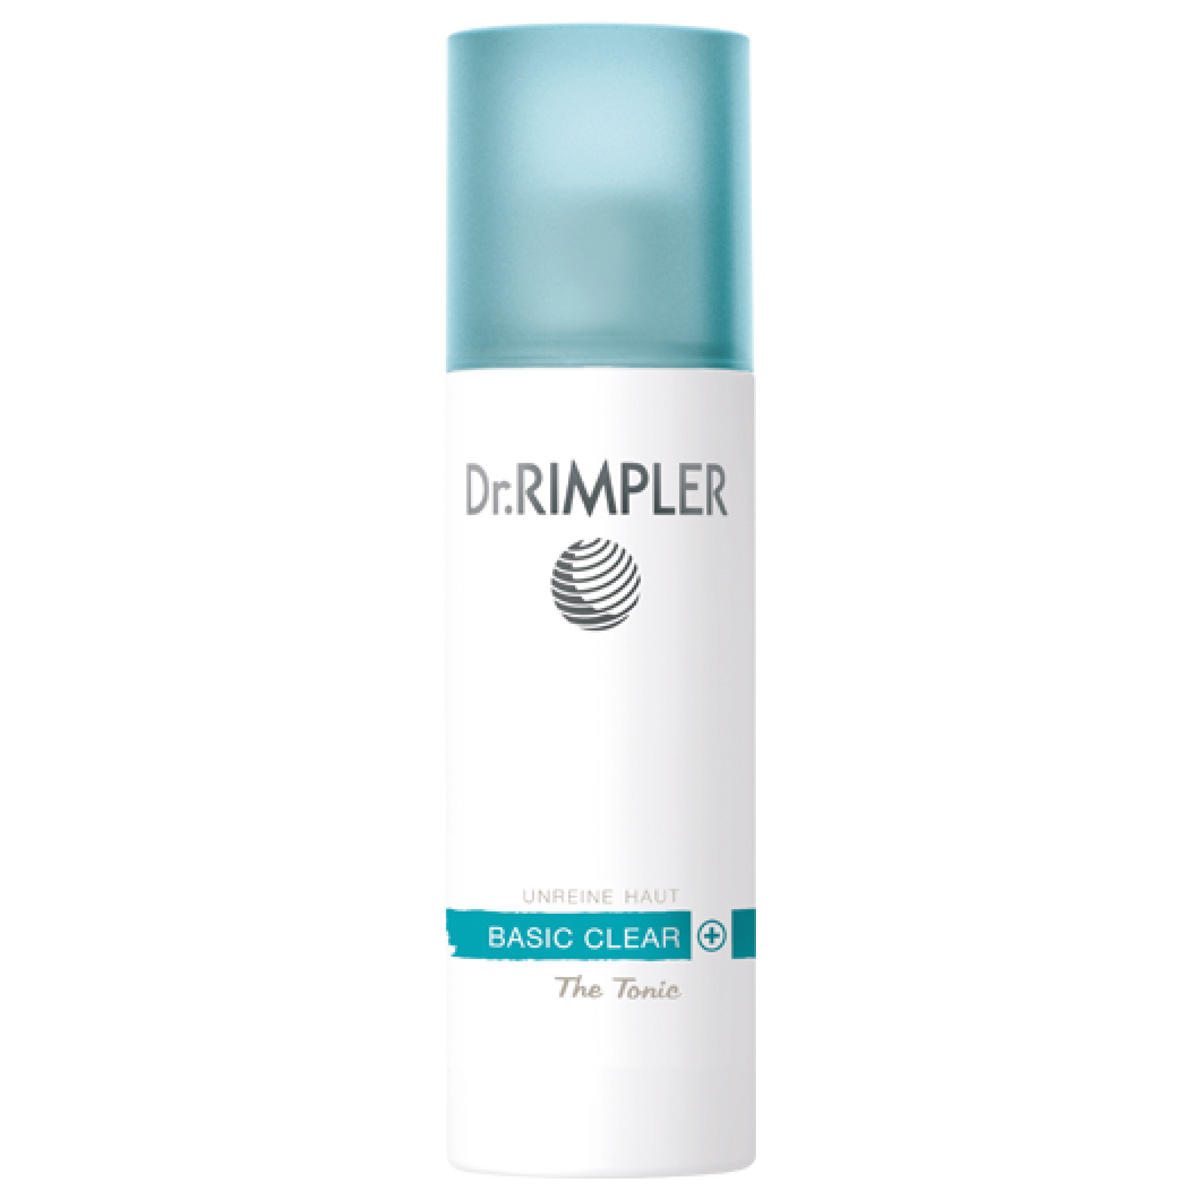 Dr. RIMPLER BASIC CLEAR+ The Tonic 200 ml - 1